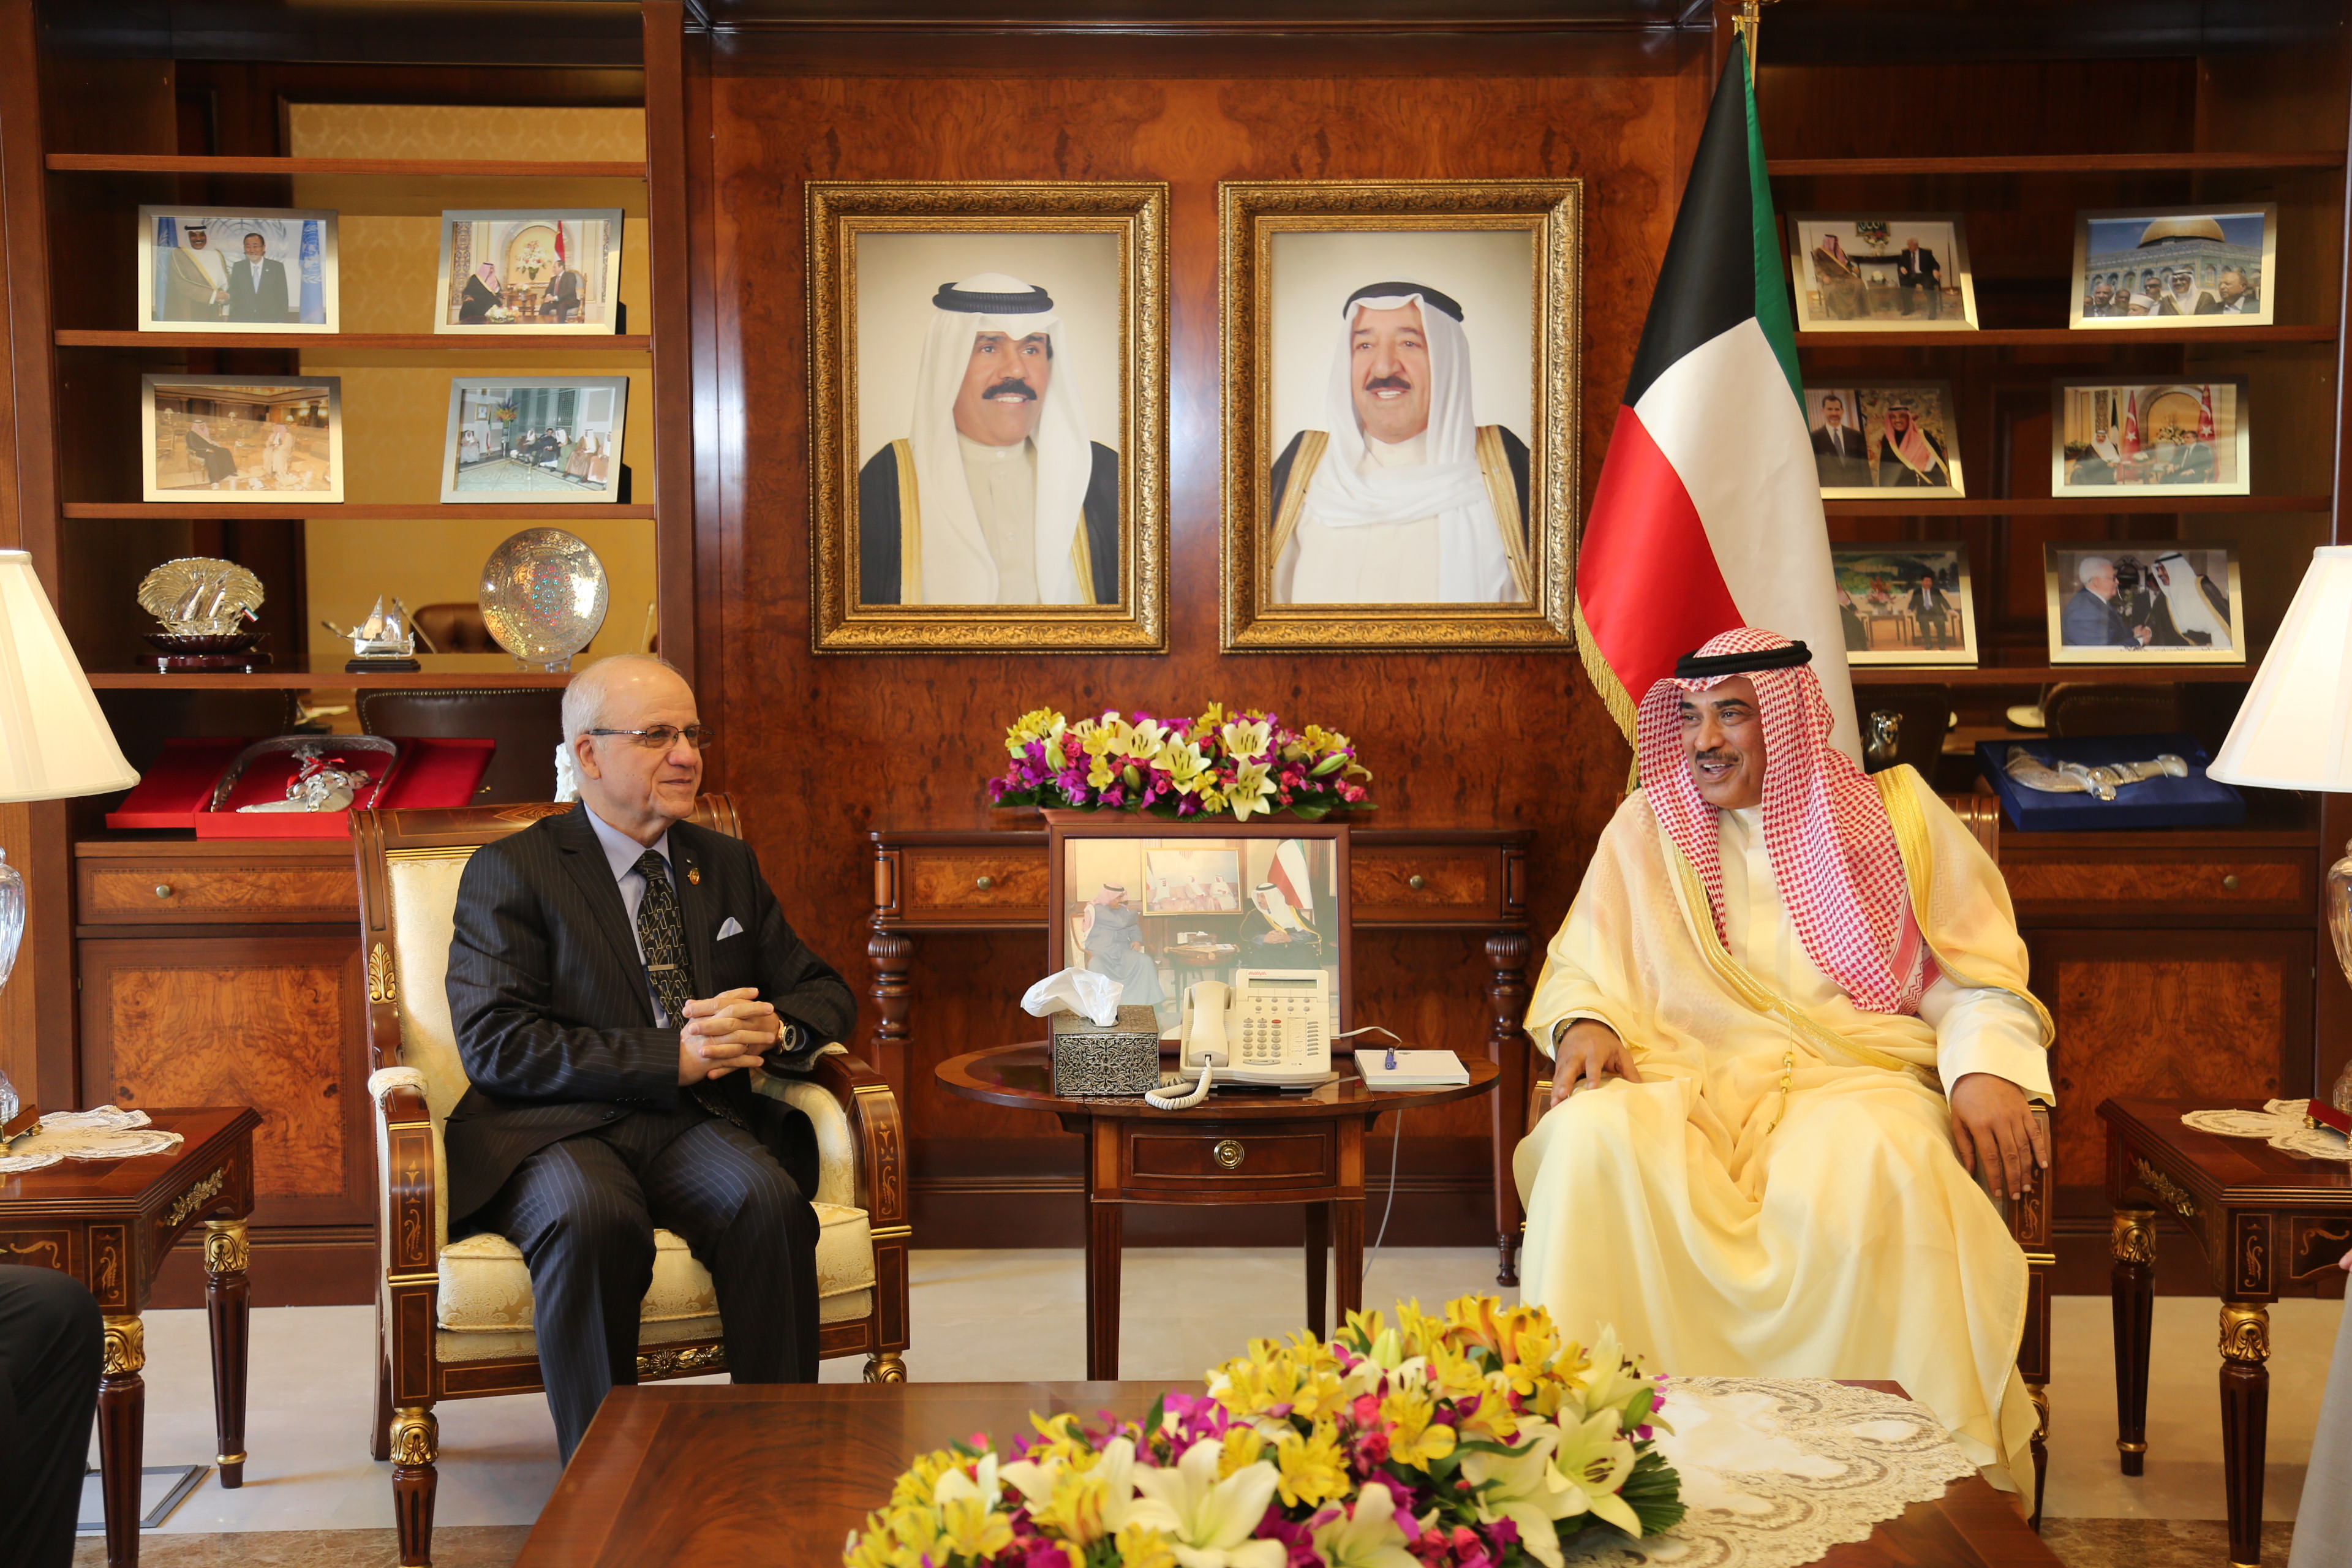 First Deputy Prime Minister and Foreign Minister Sheikh Sabah Al-Khaled Al-Hamad Al-Sabah met with Algeria's visiting Constitutional Council Chairman Murad Madlasi